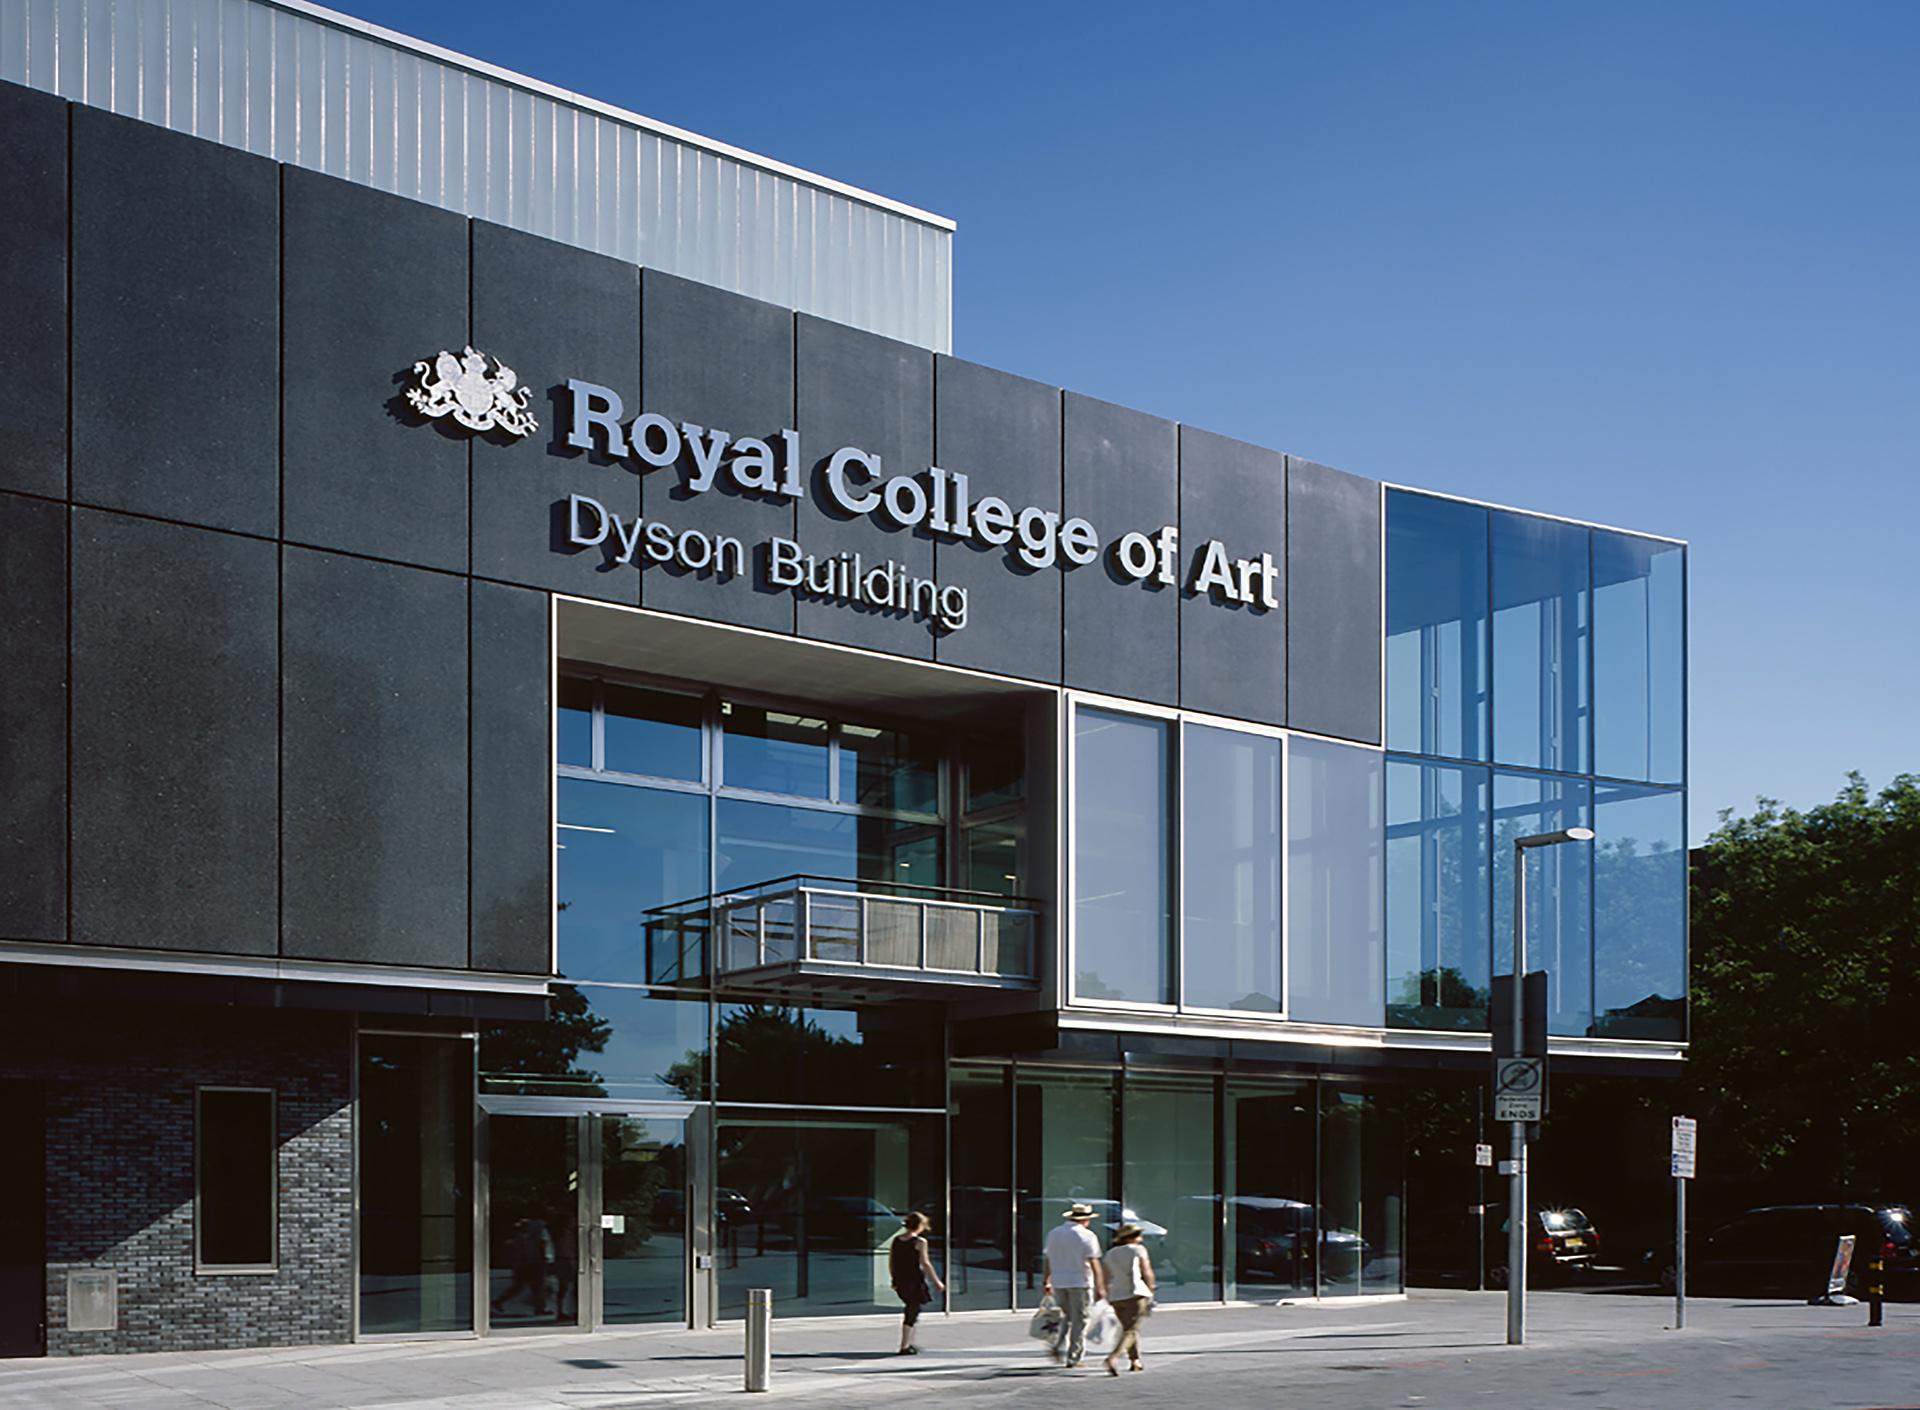 Dyson Building at Royal College of Art